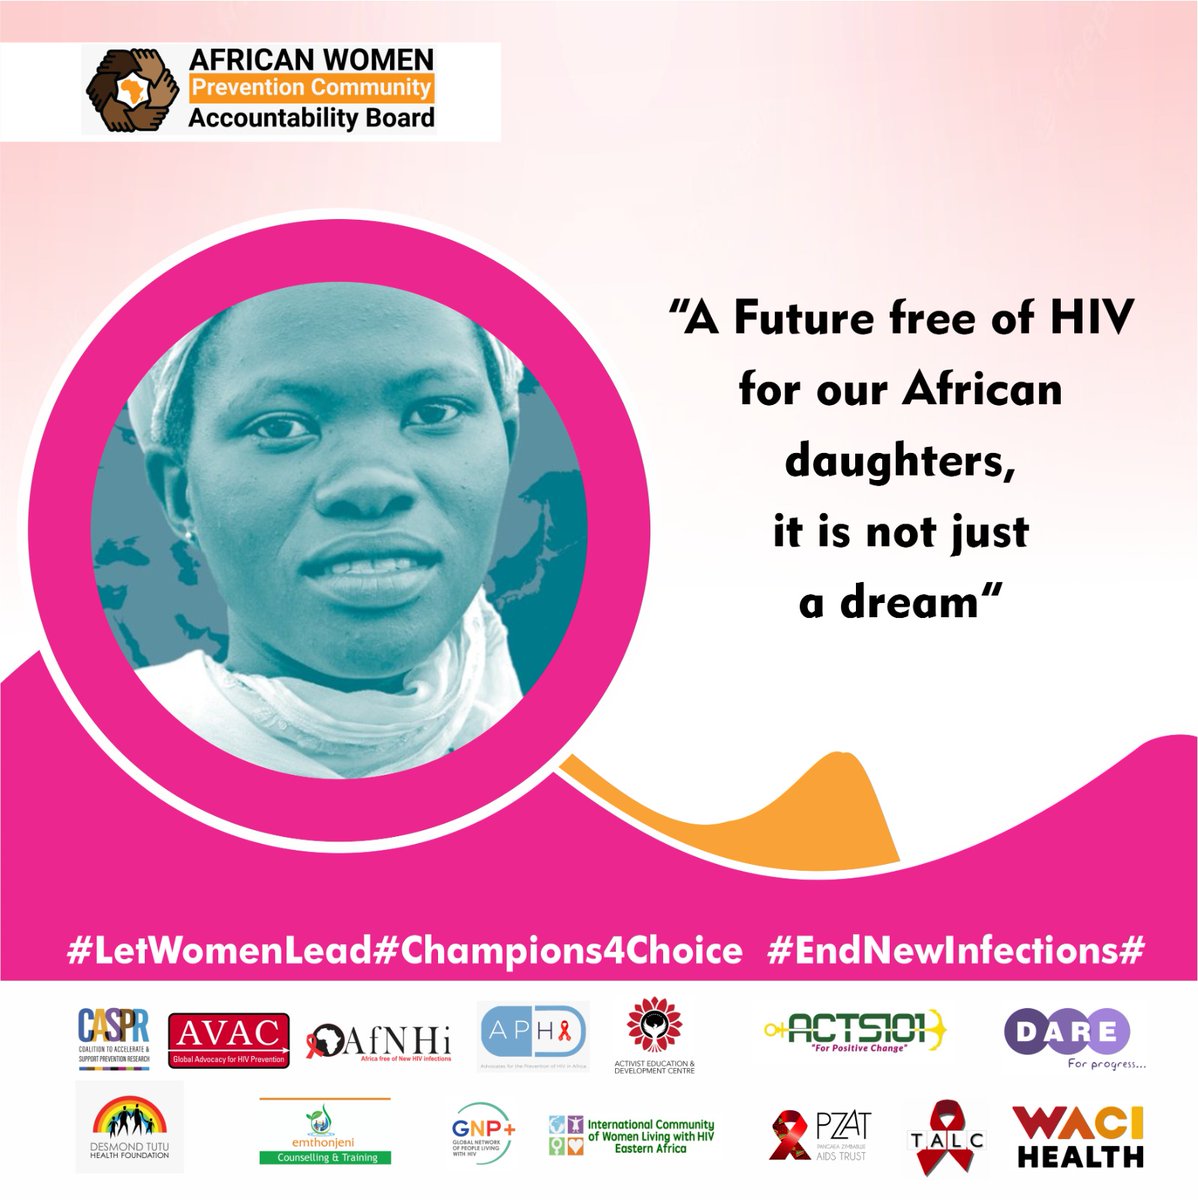 #EndNewInfections Adolescent girls and young women are at the heart of our mission. Let's scale interventions that prioritize their needs, combat stigma, and discrimination. #ChoiceManifesto
#Champions4Choice #dareforprogress